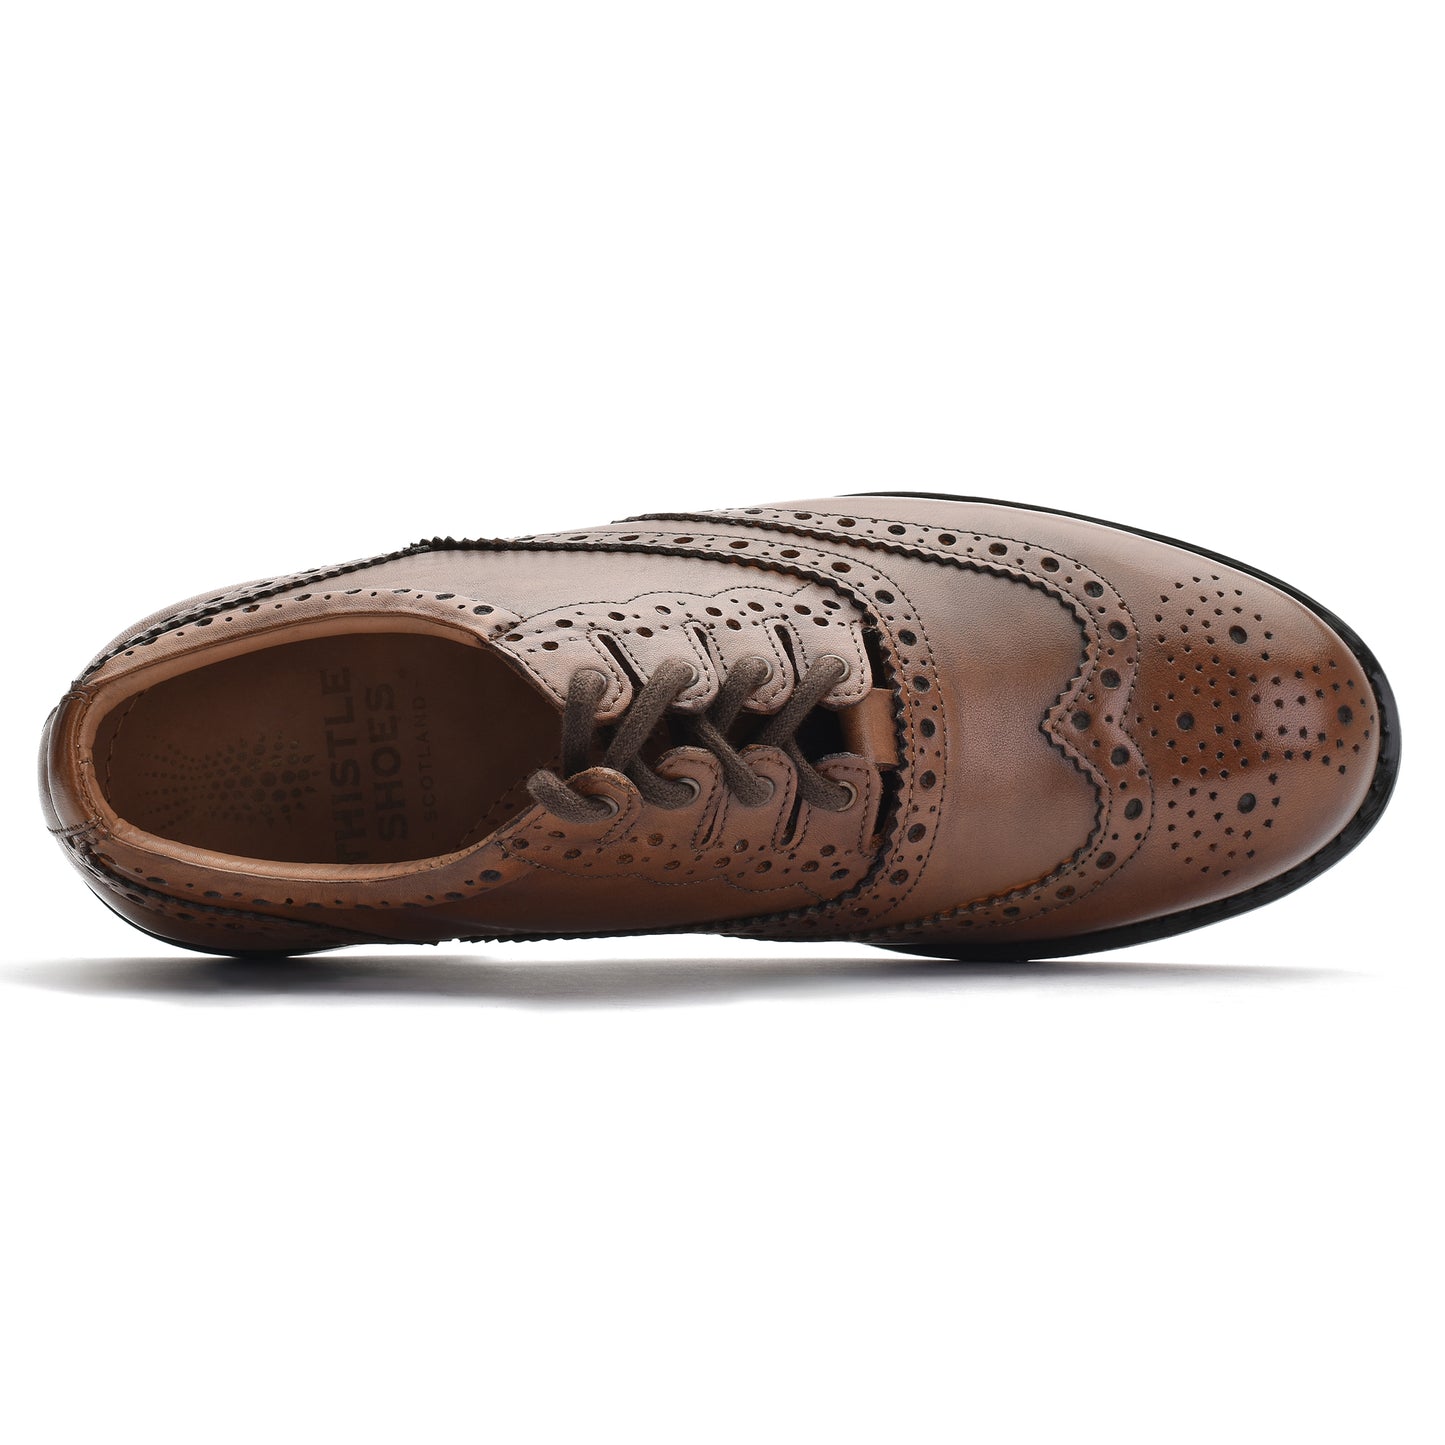 Goodyear Welted Ghillie Brogue (1112) - Brown